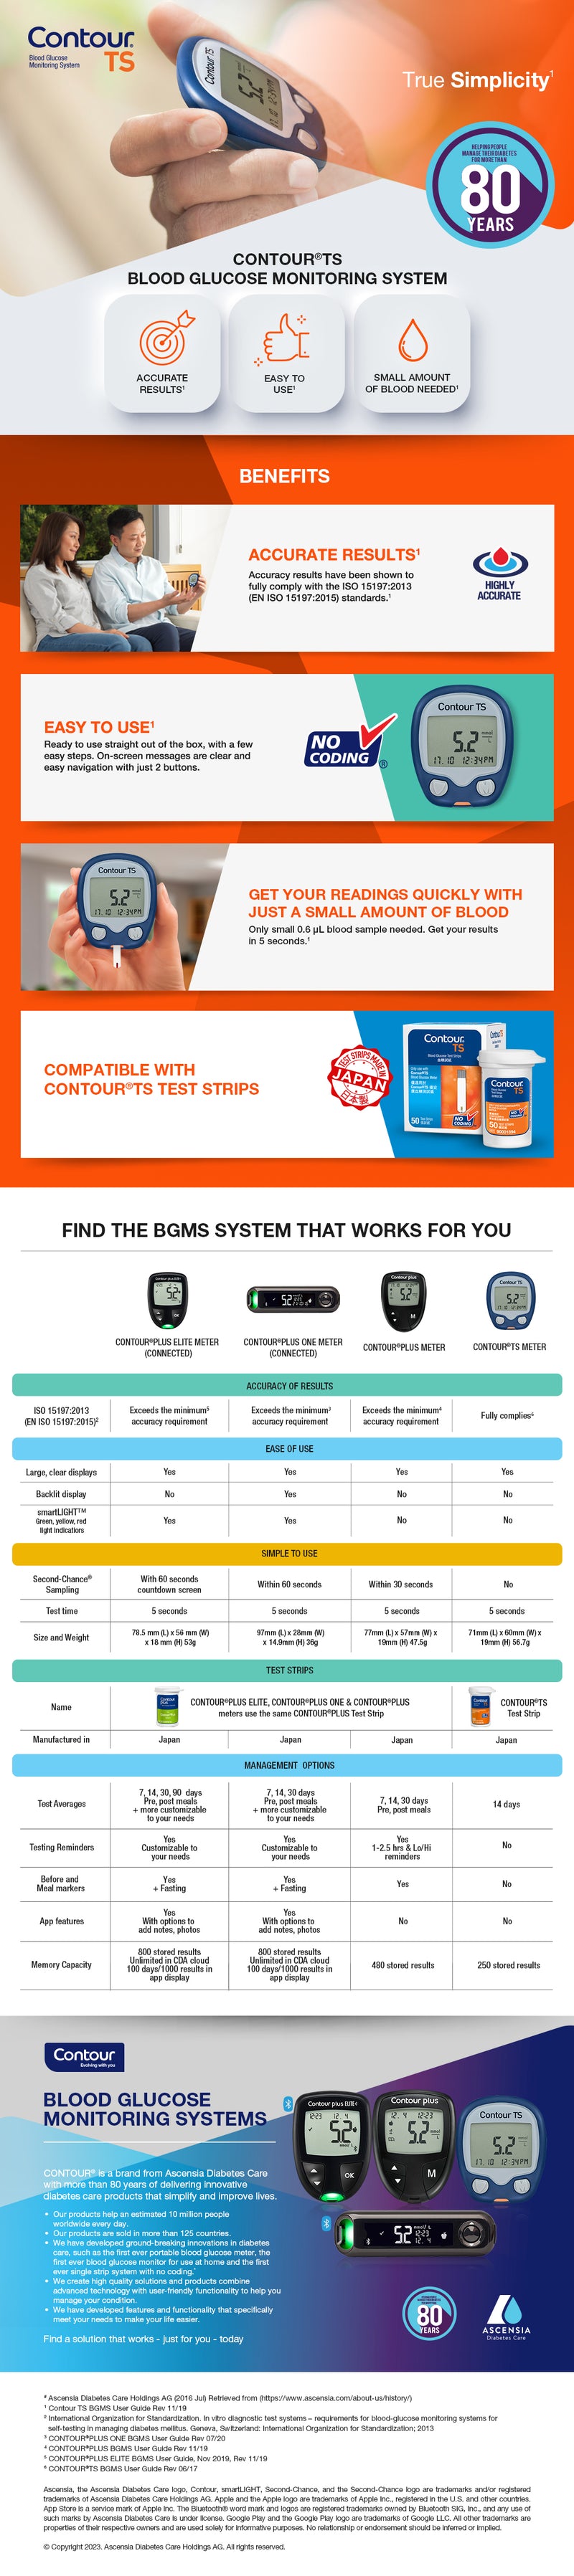 CONTOUR®TS Self Monitoring Blood Glucose Meter Set [HK Label Authentic Product]  Expiry: 01 Apr 2024